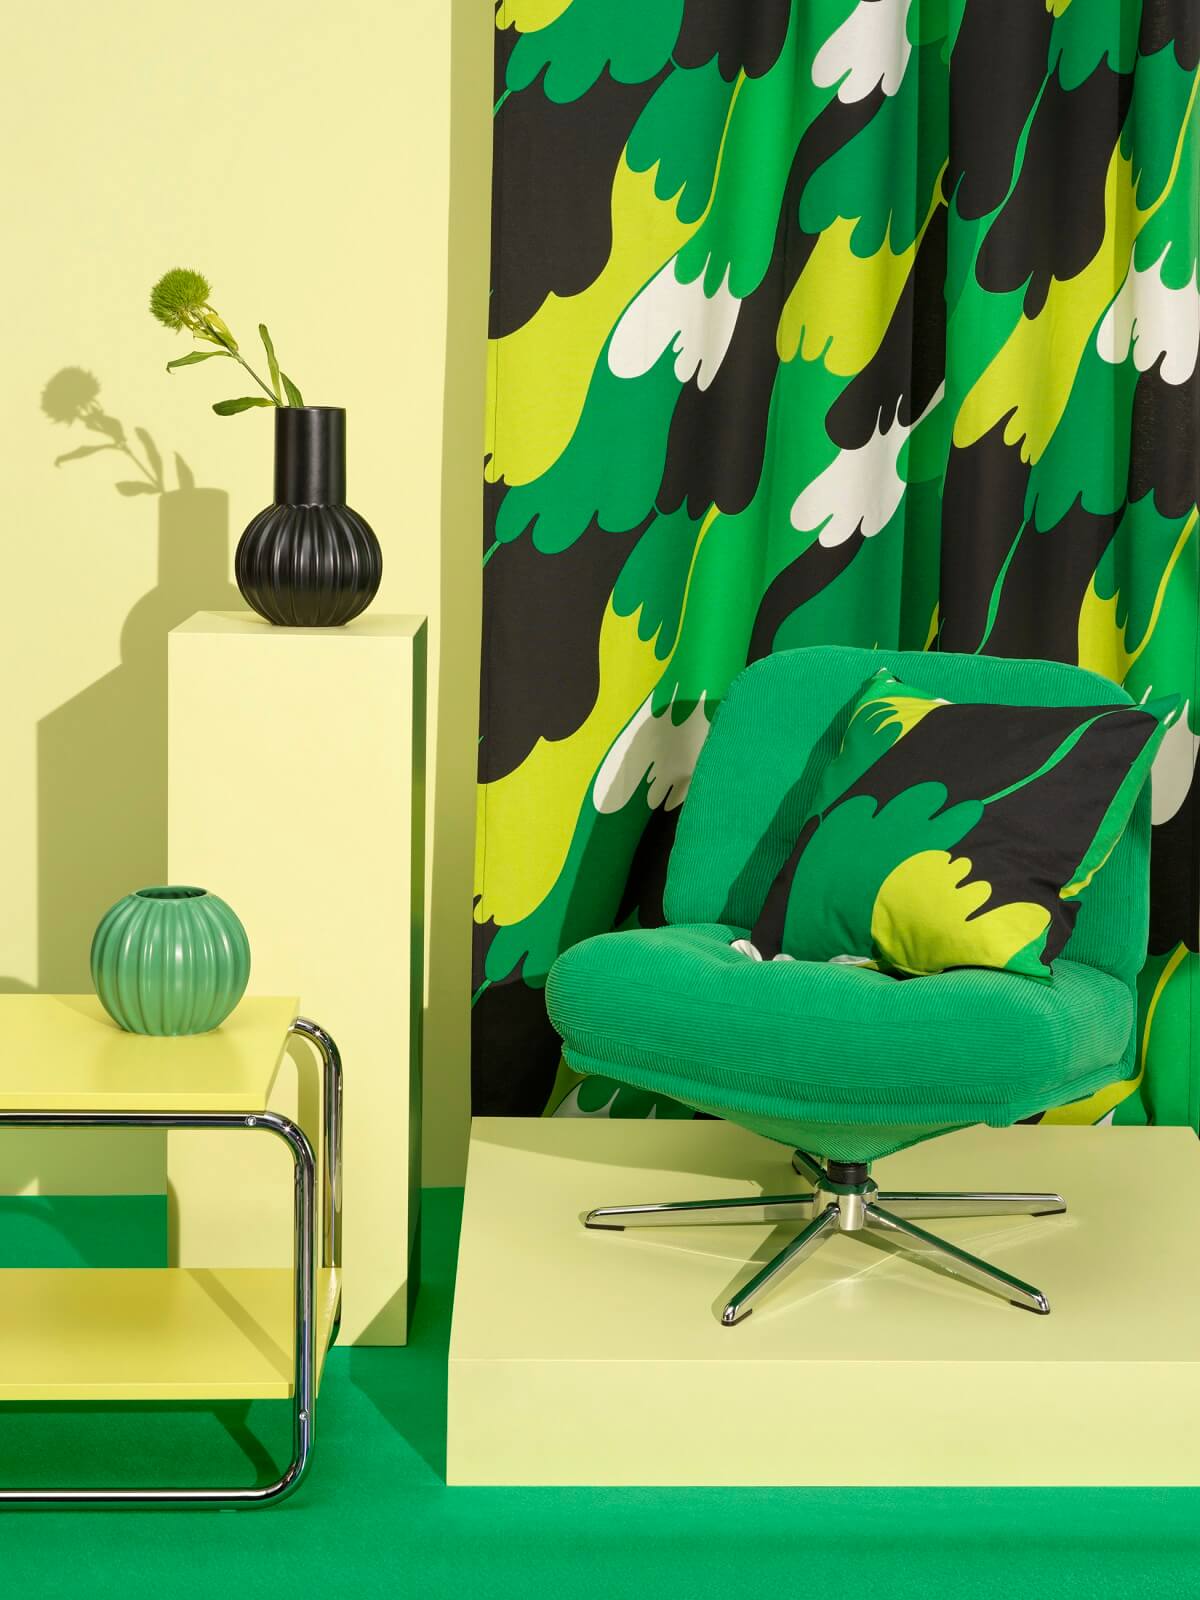 IKEA Nytillverkad Collection Part 3: Playful Designs from the 60s and 70s